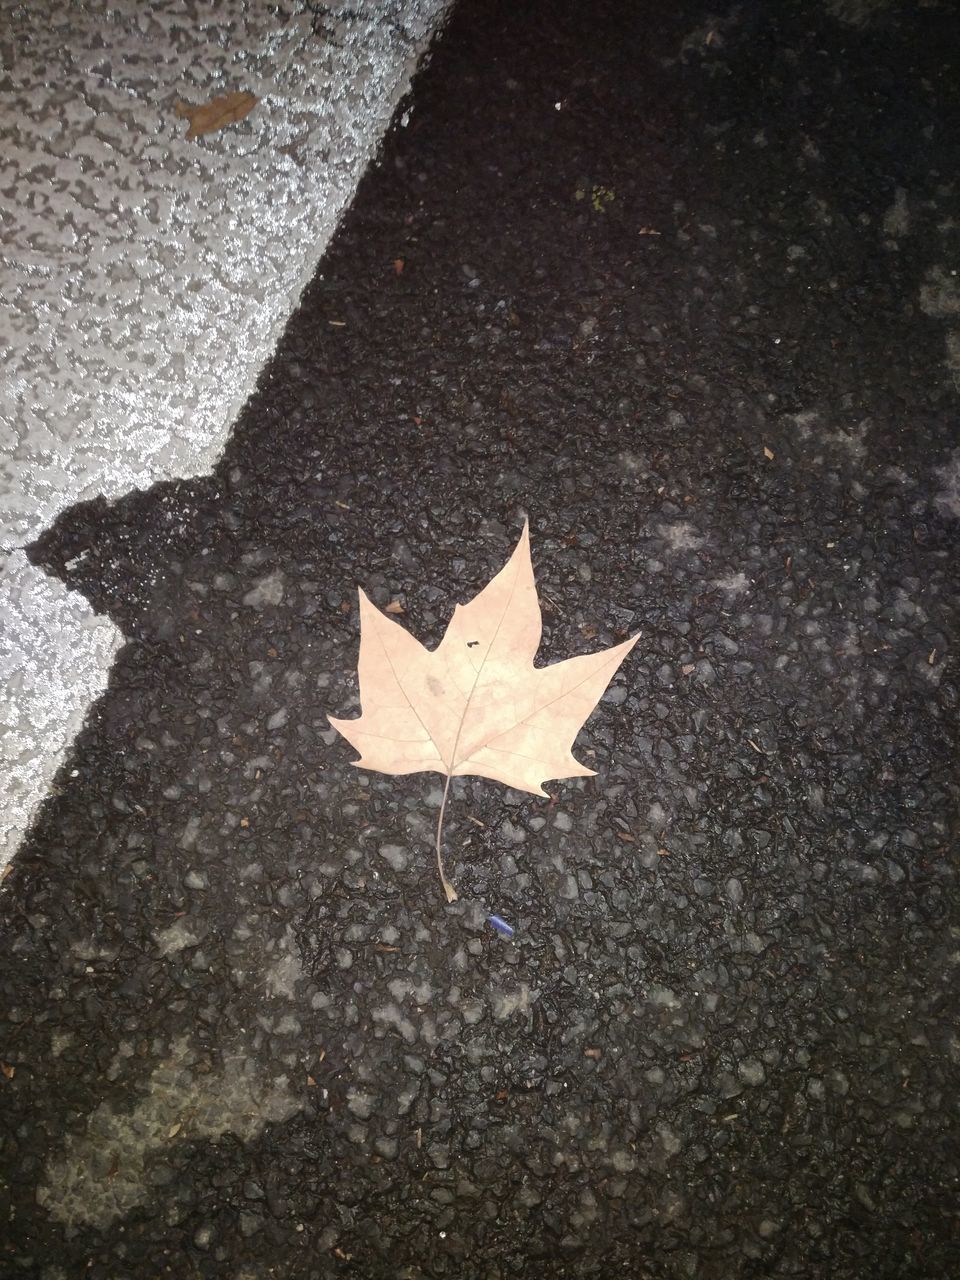 plant part, leaf, autumn, high angle view, maple leaf, nature, change, no people, day, road, falling, asphalt, close-up, dry, street, city, outdoors, directly above, textured, single object, natural condition